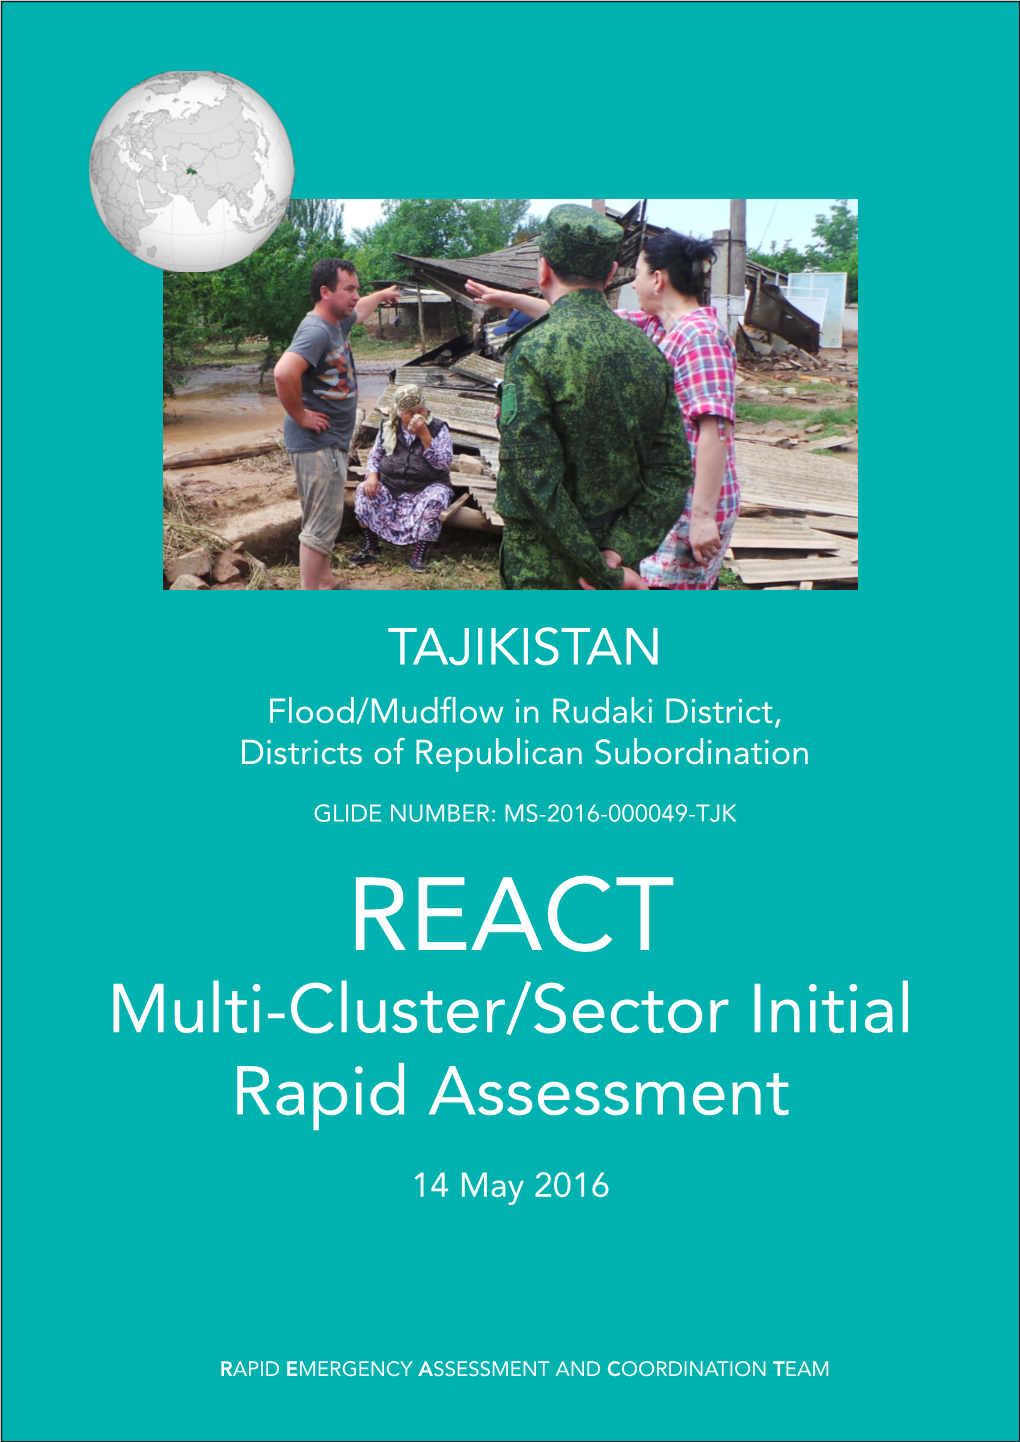 Multi-Cluster/Sector Initial Rapid Assessment